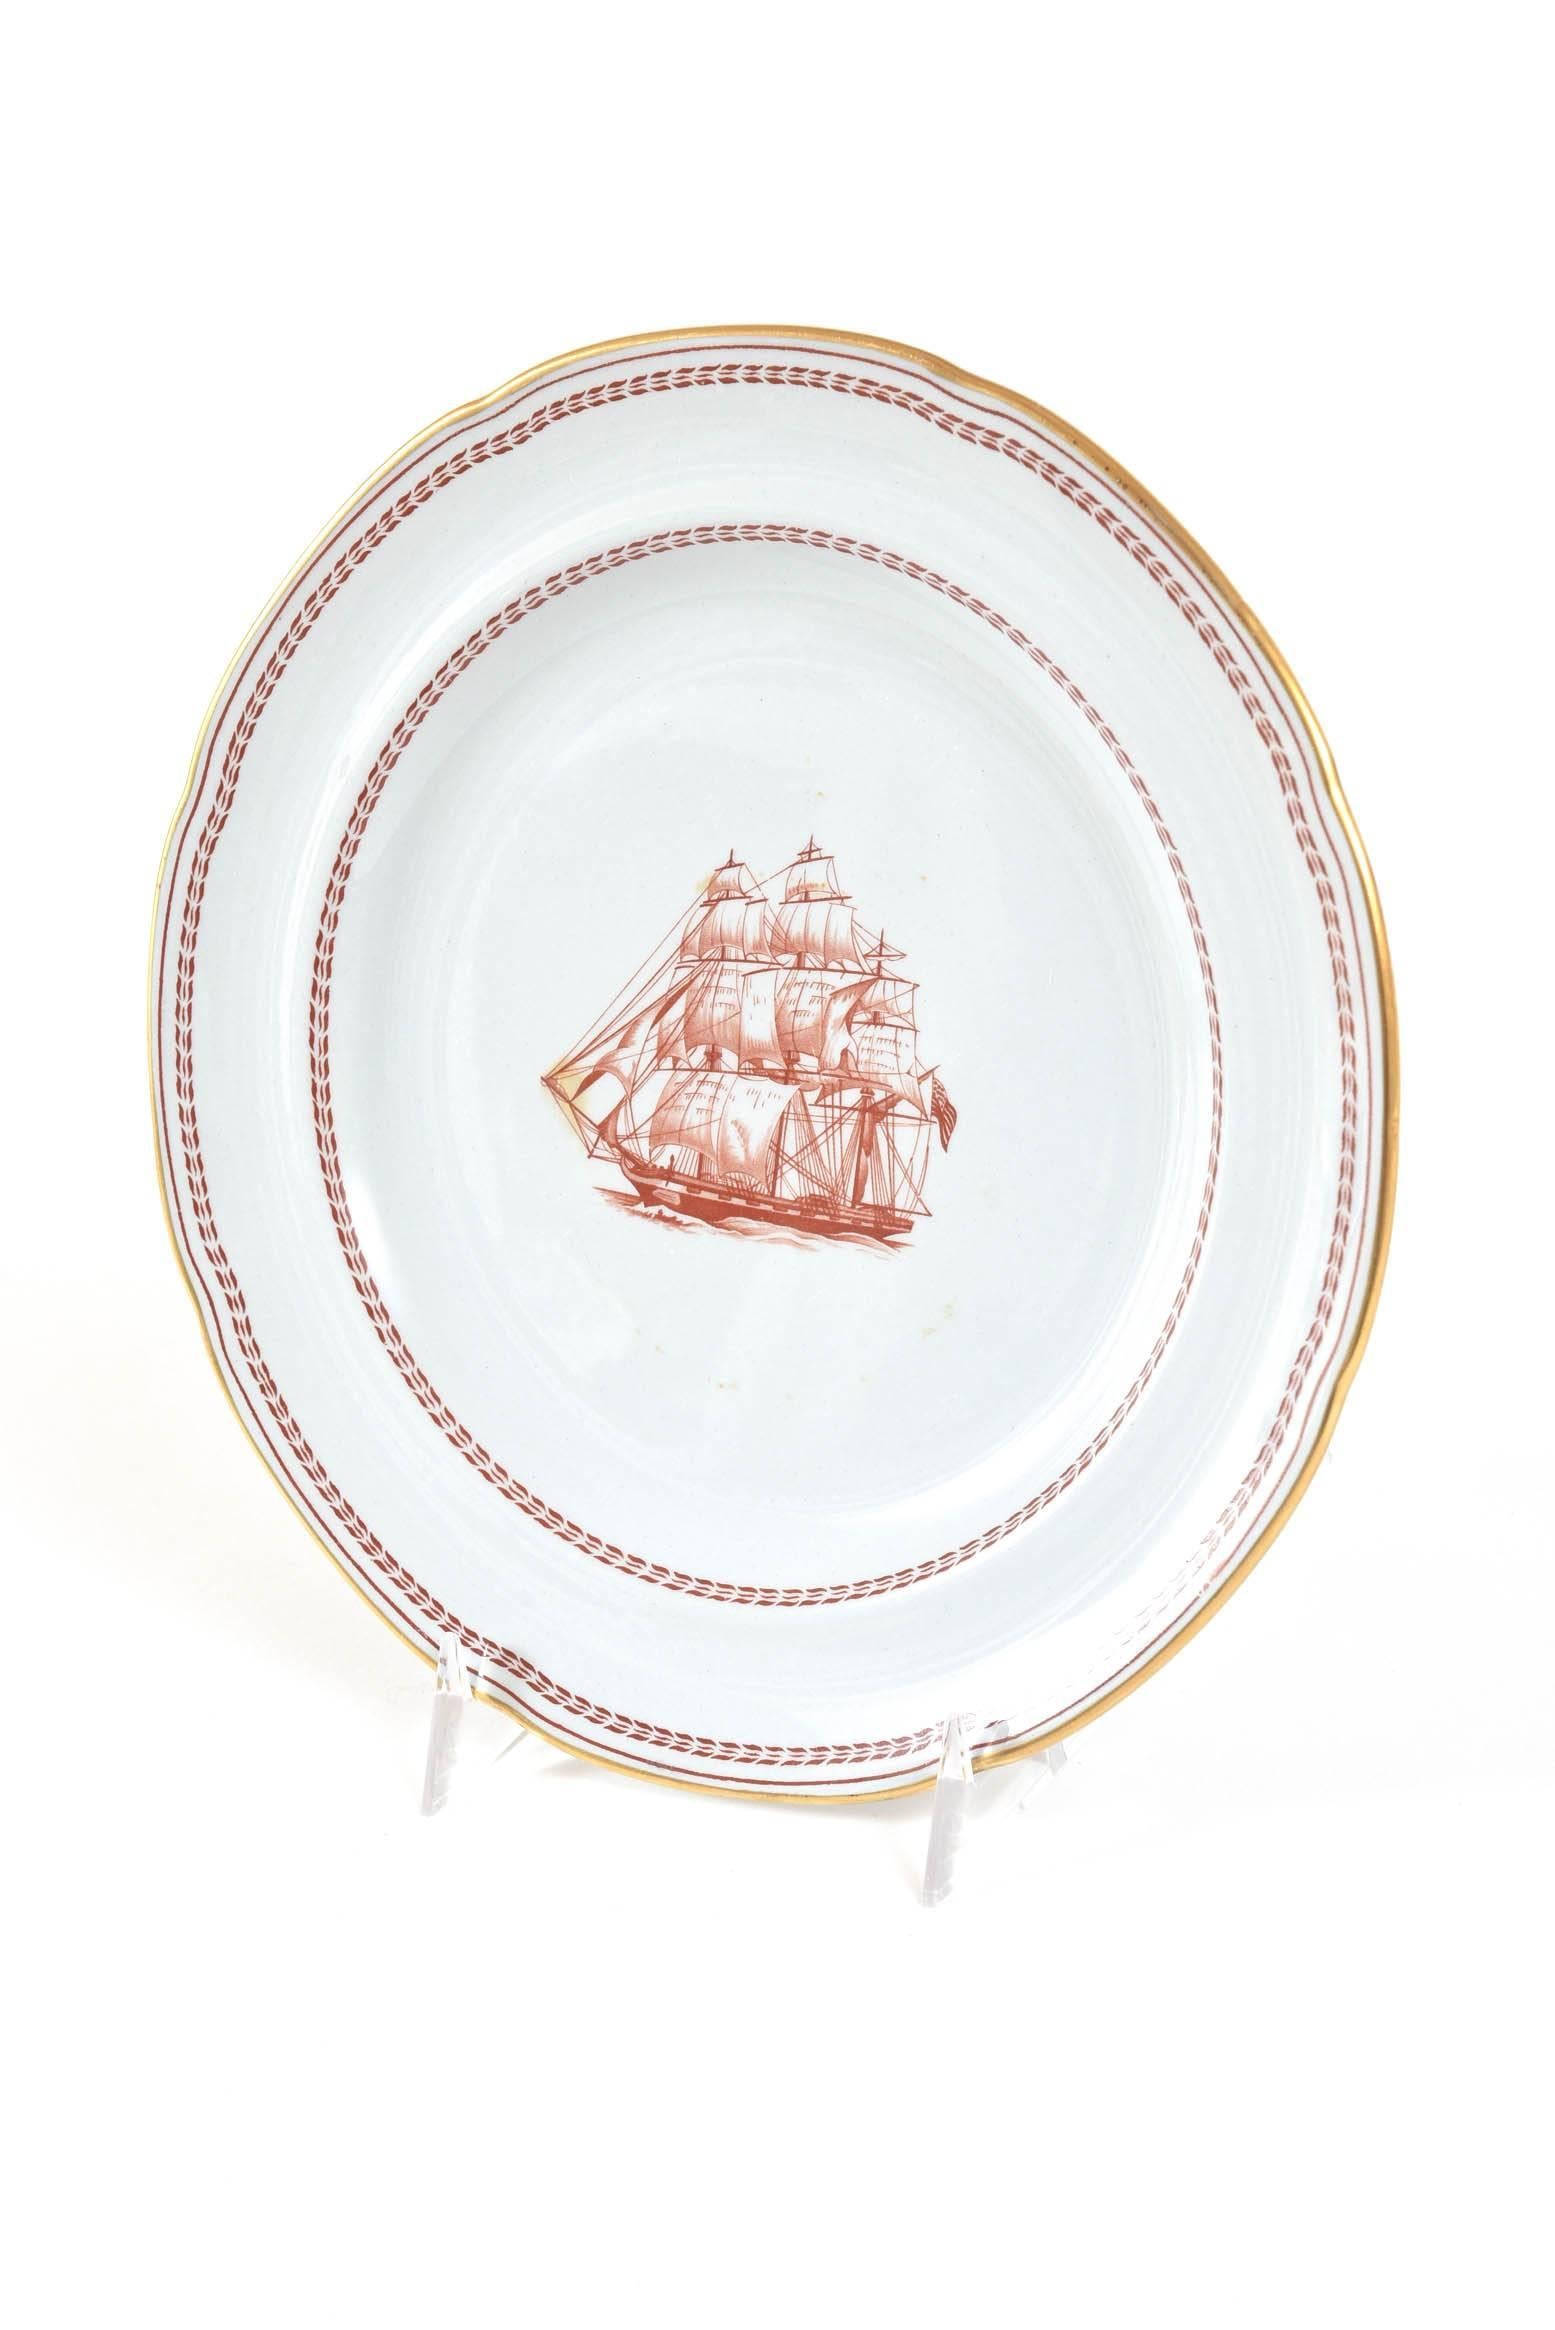 From our stock of a very popular pattern from the 1920s-1960s in red transfer ware, slightly scalloped shape and gilt edge trim.
This is for one dinner plate and more are available. Kindly inquire.